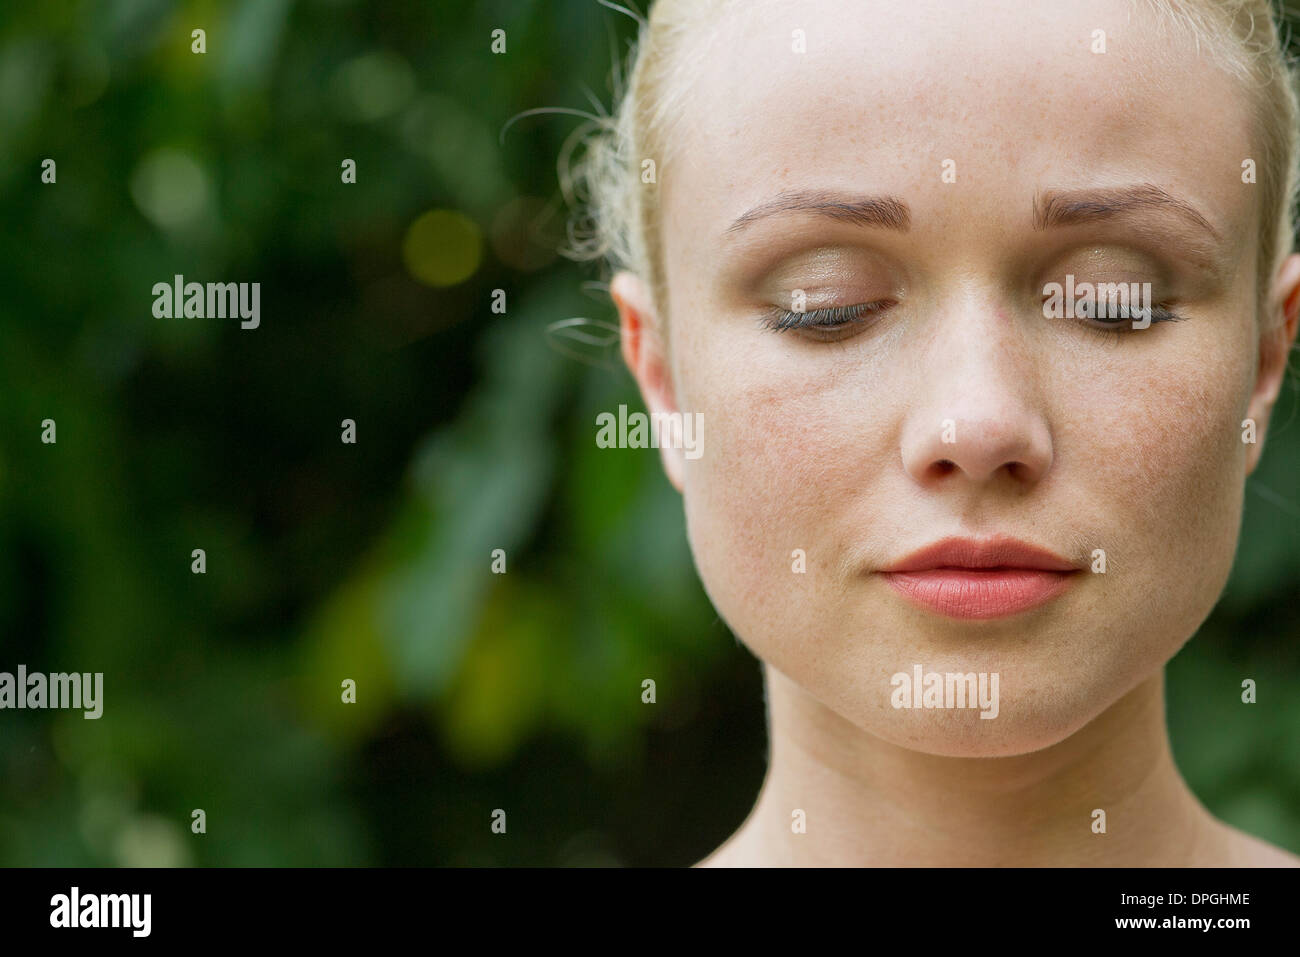 Face of young woman Stock Photo